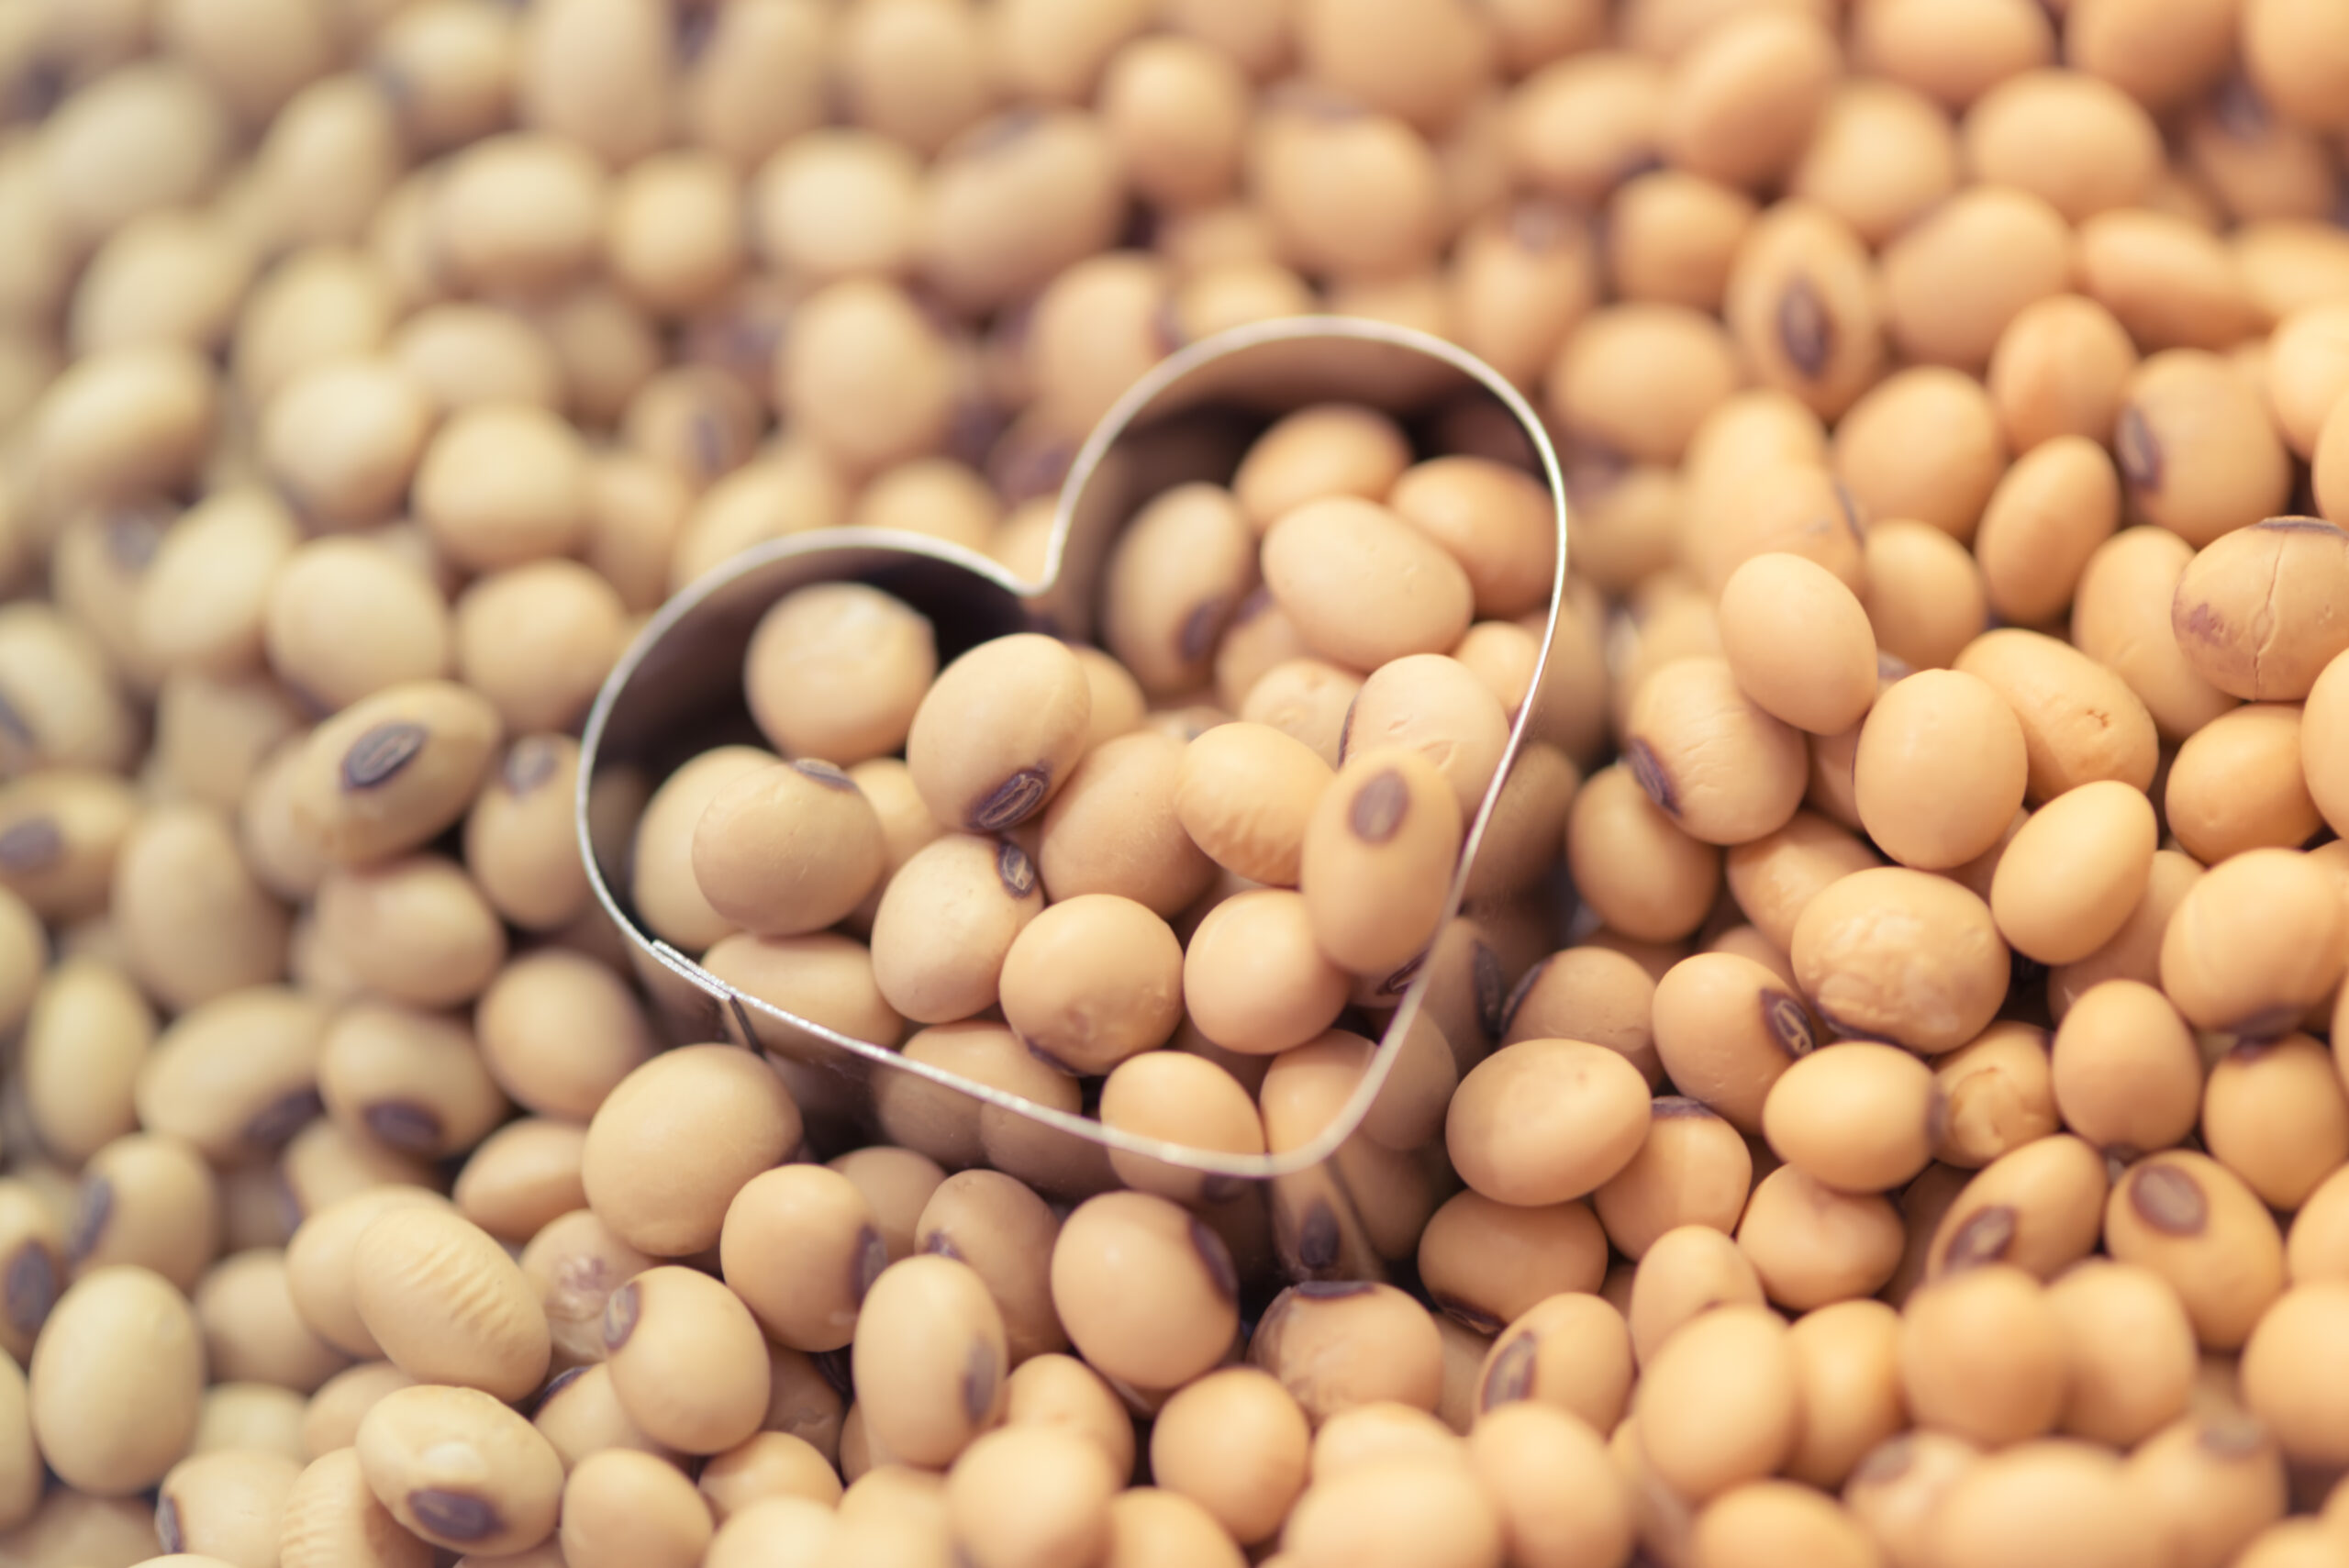 Soy protein helps lower bad cholesterol a small but important